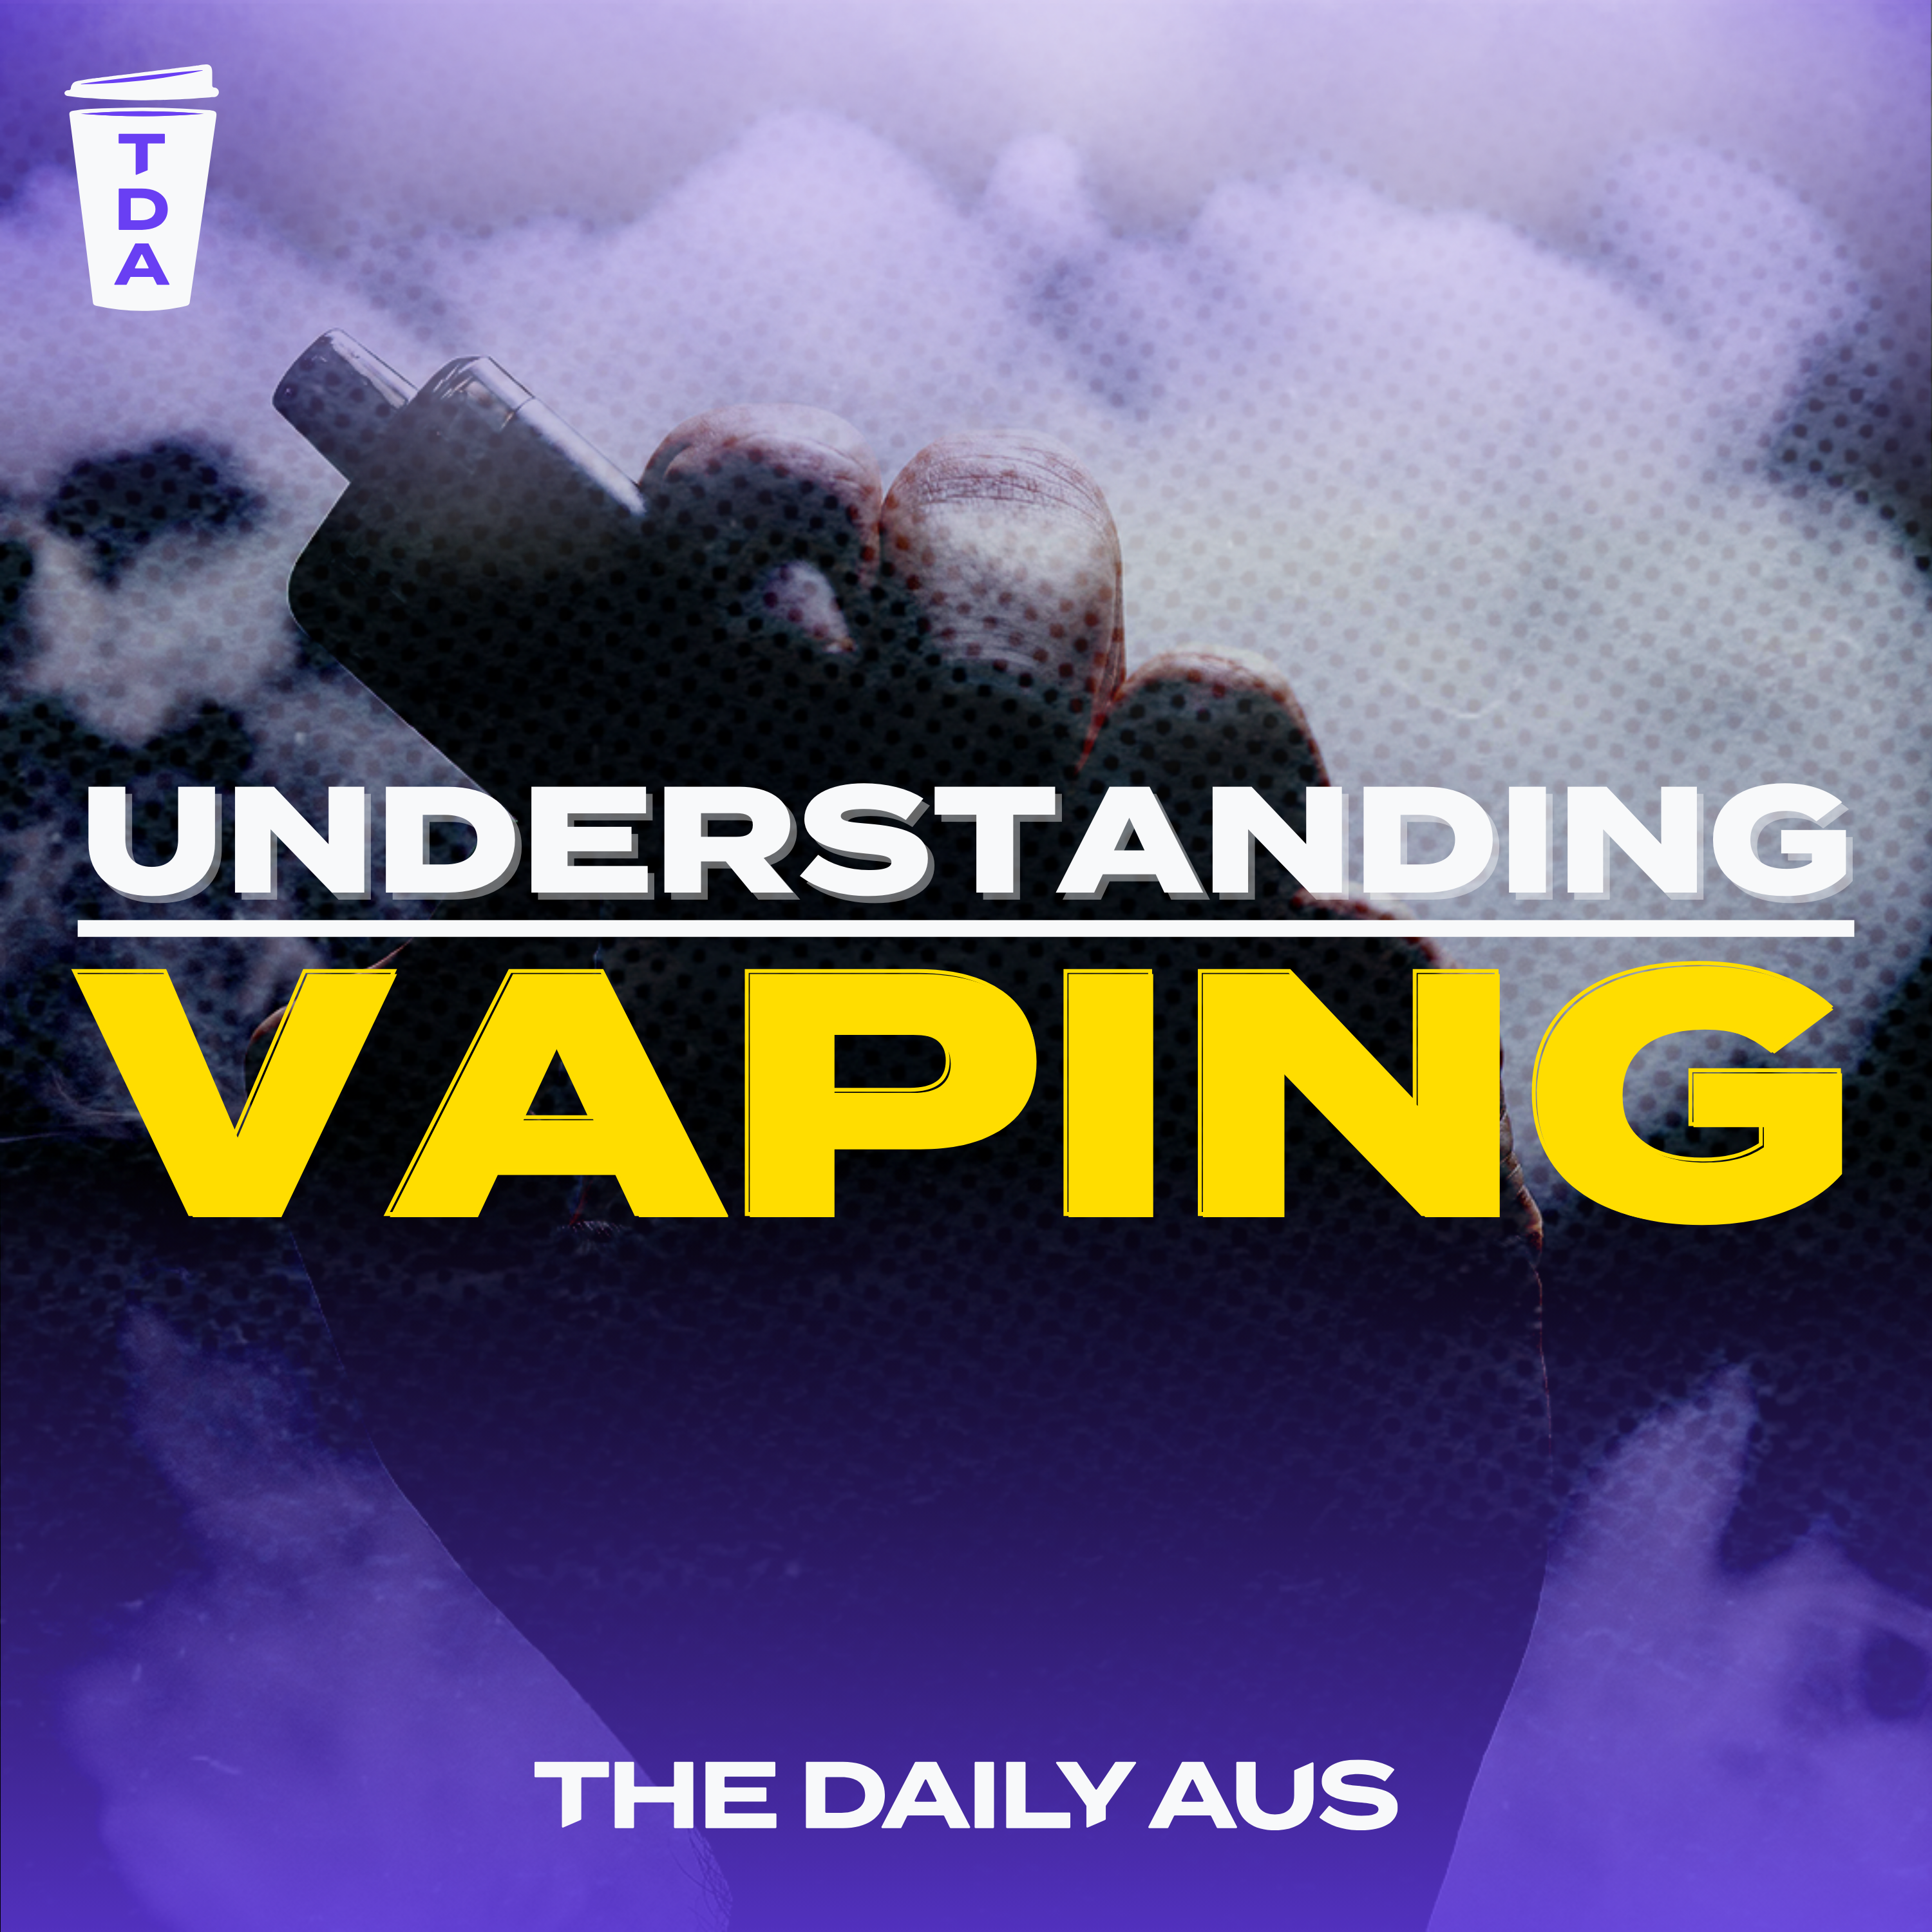 What is actually in a vape?